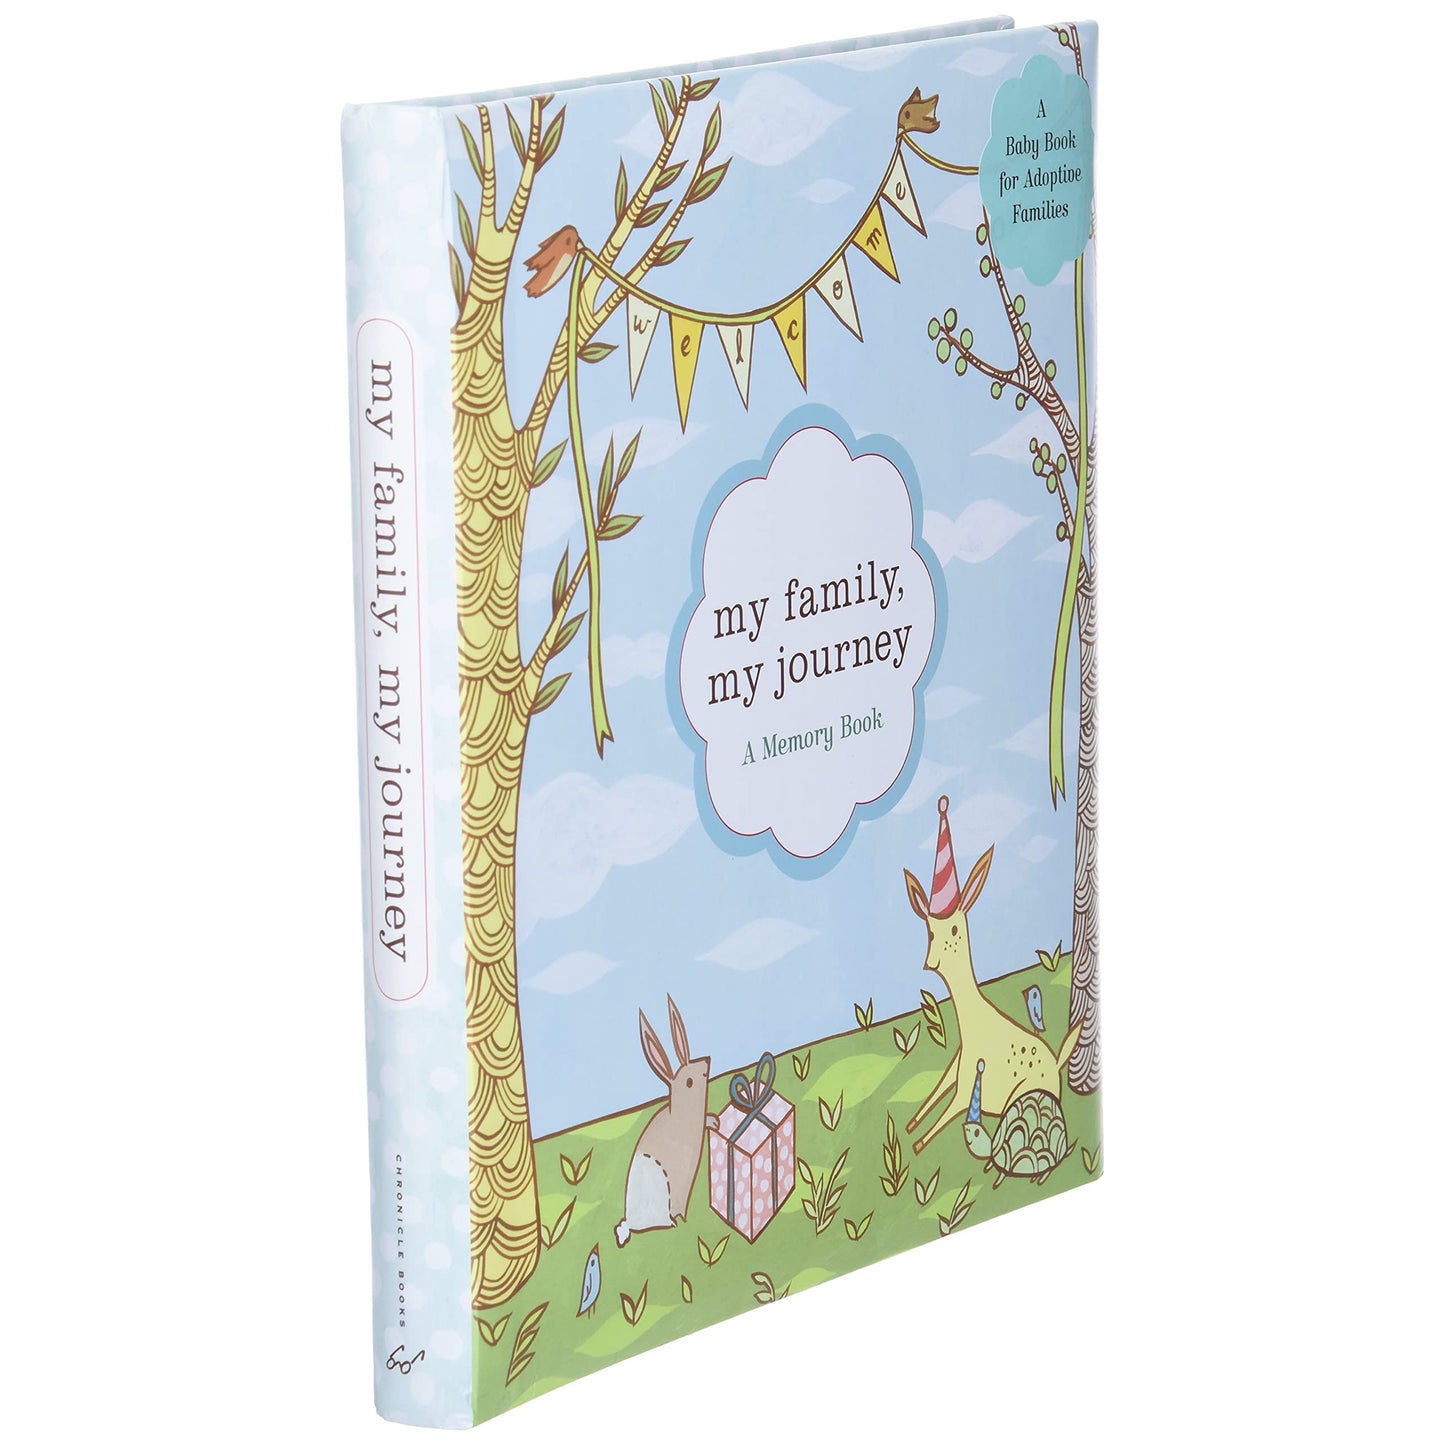 My Family, My Journey - A Baby Book for Adoptive Families